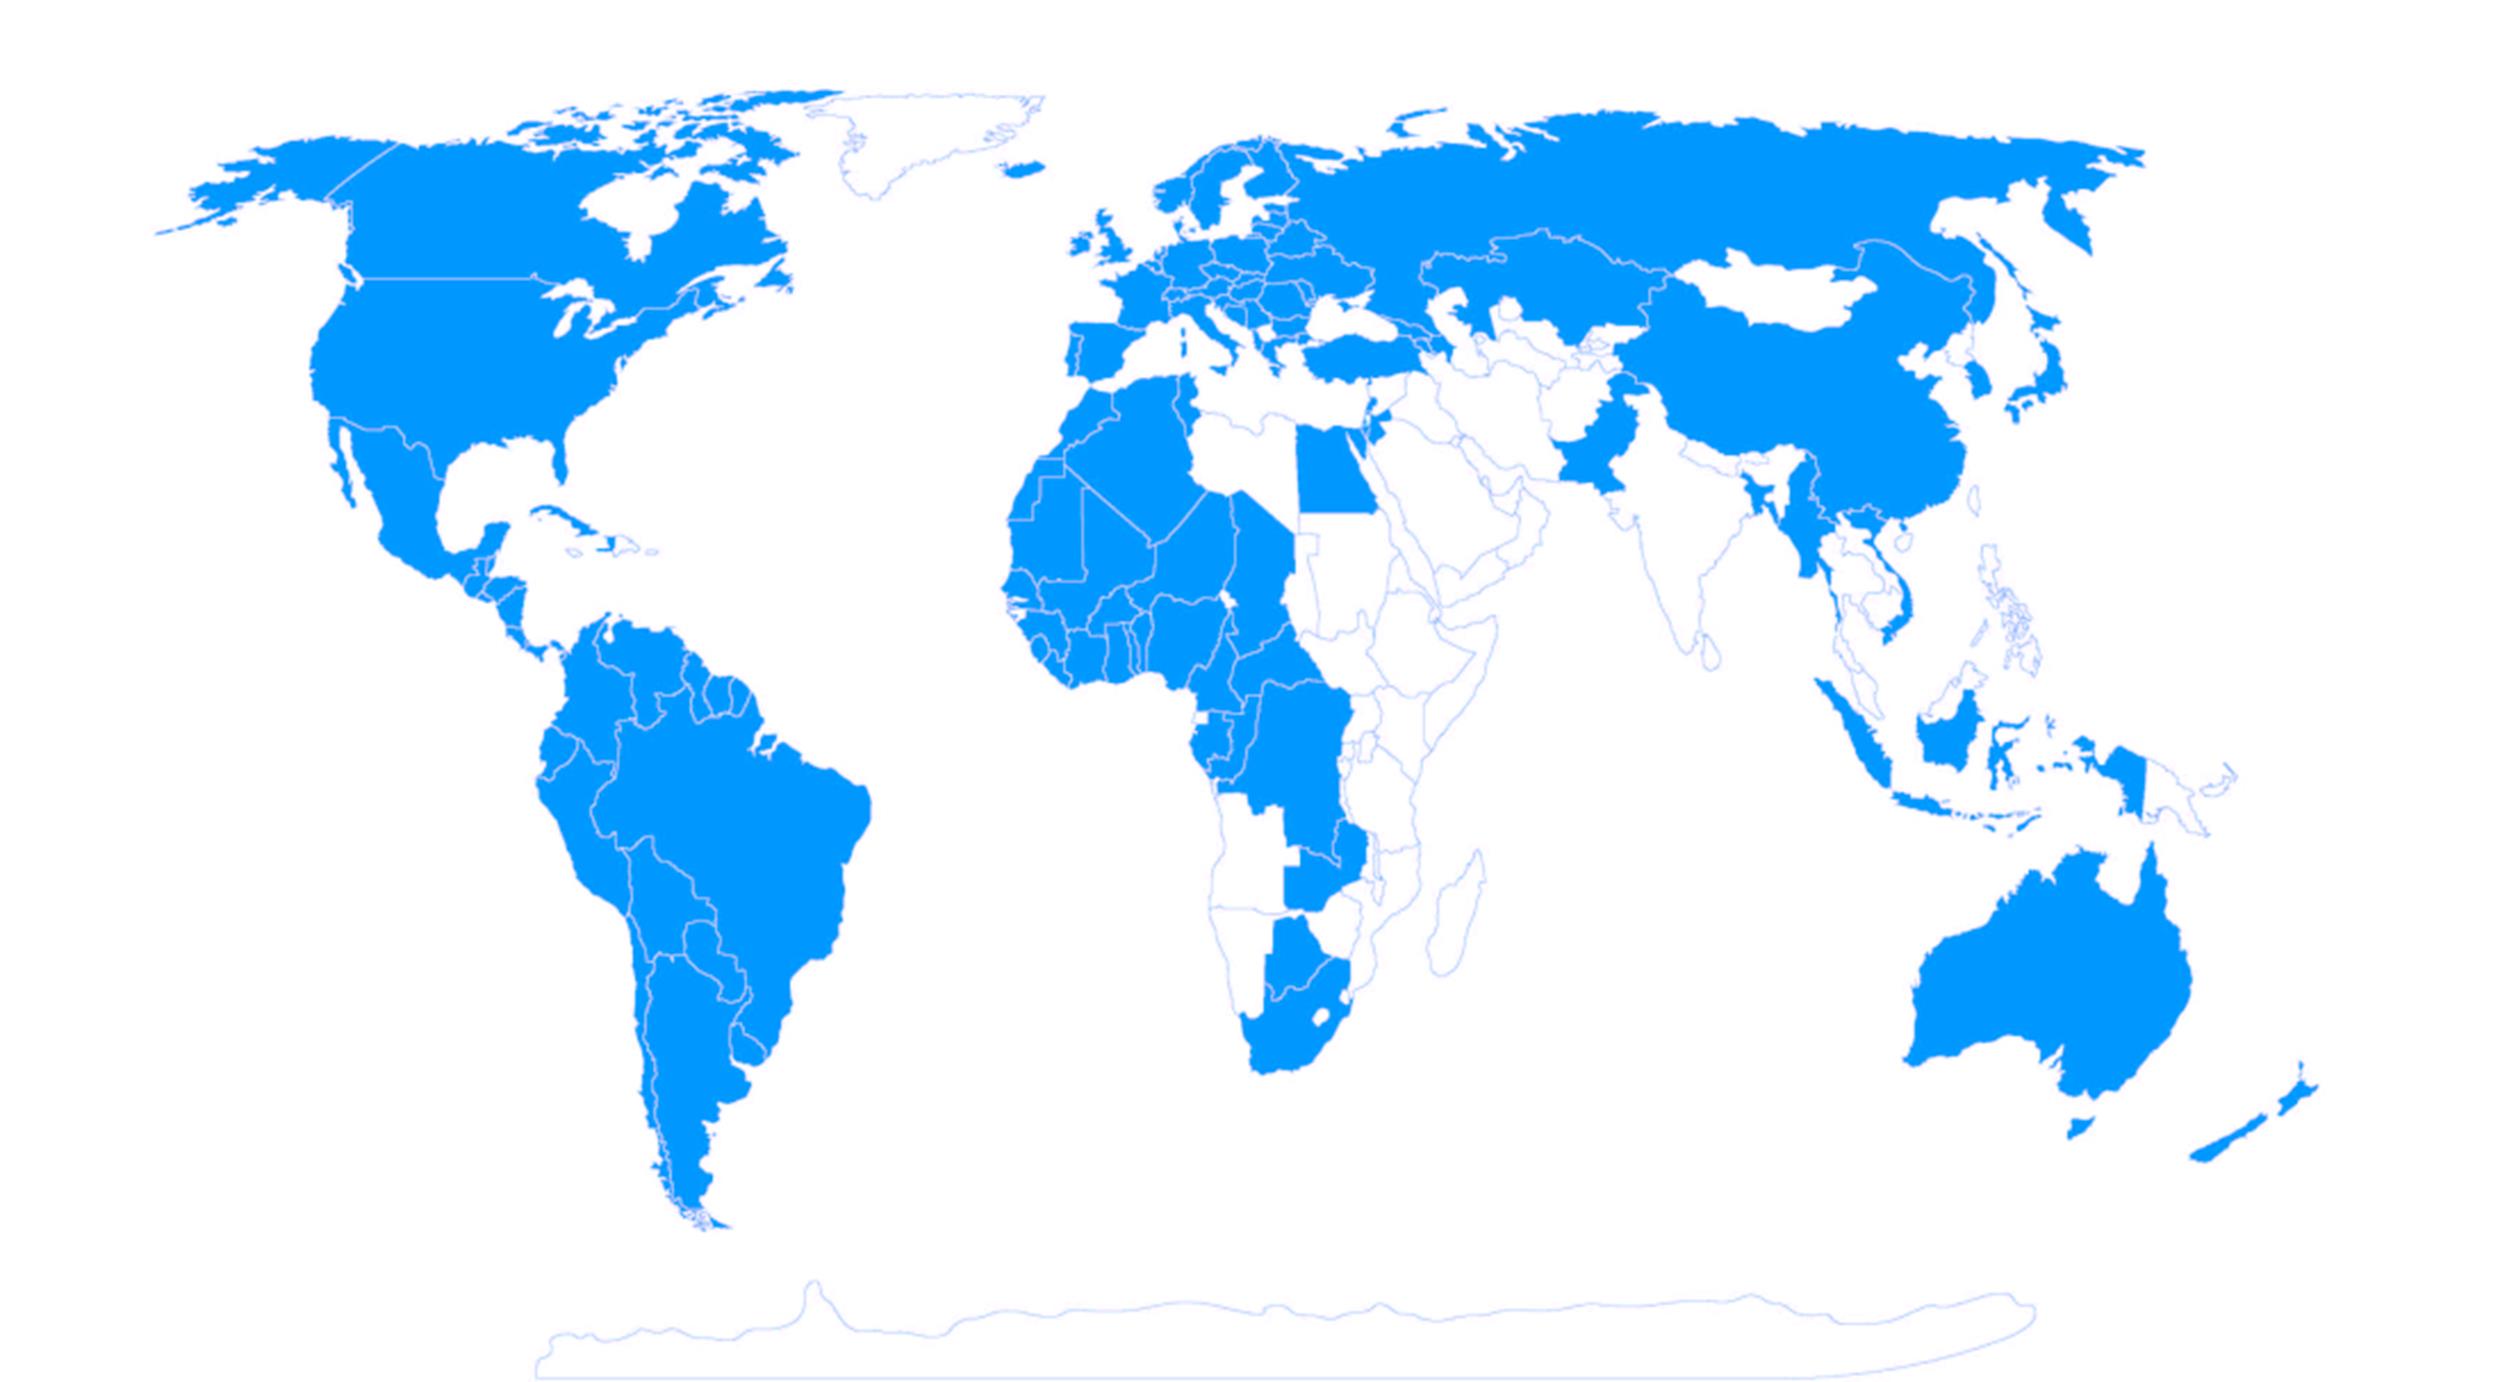 The territories marked in blue show where ZAiKS concluded agreements